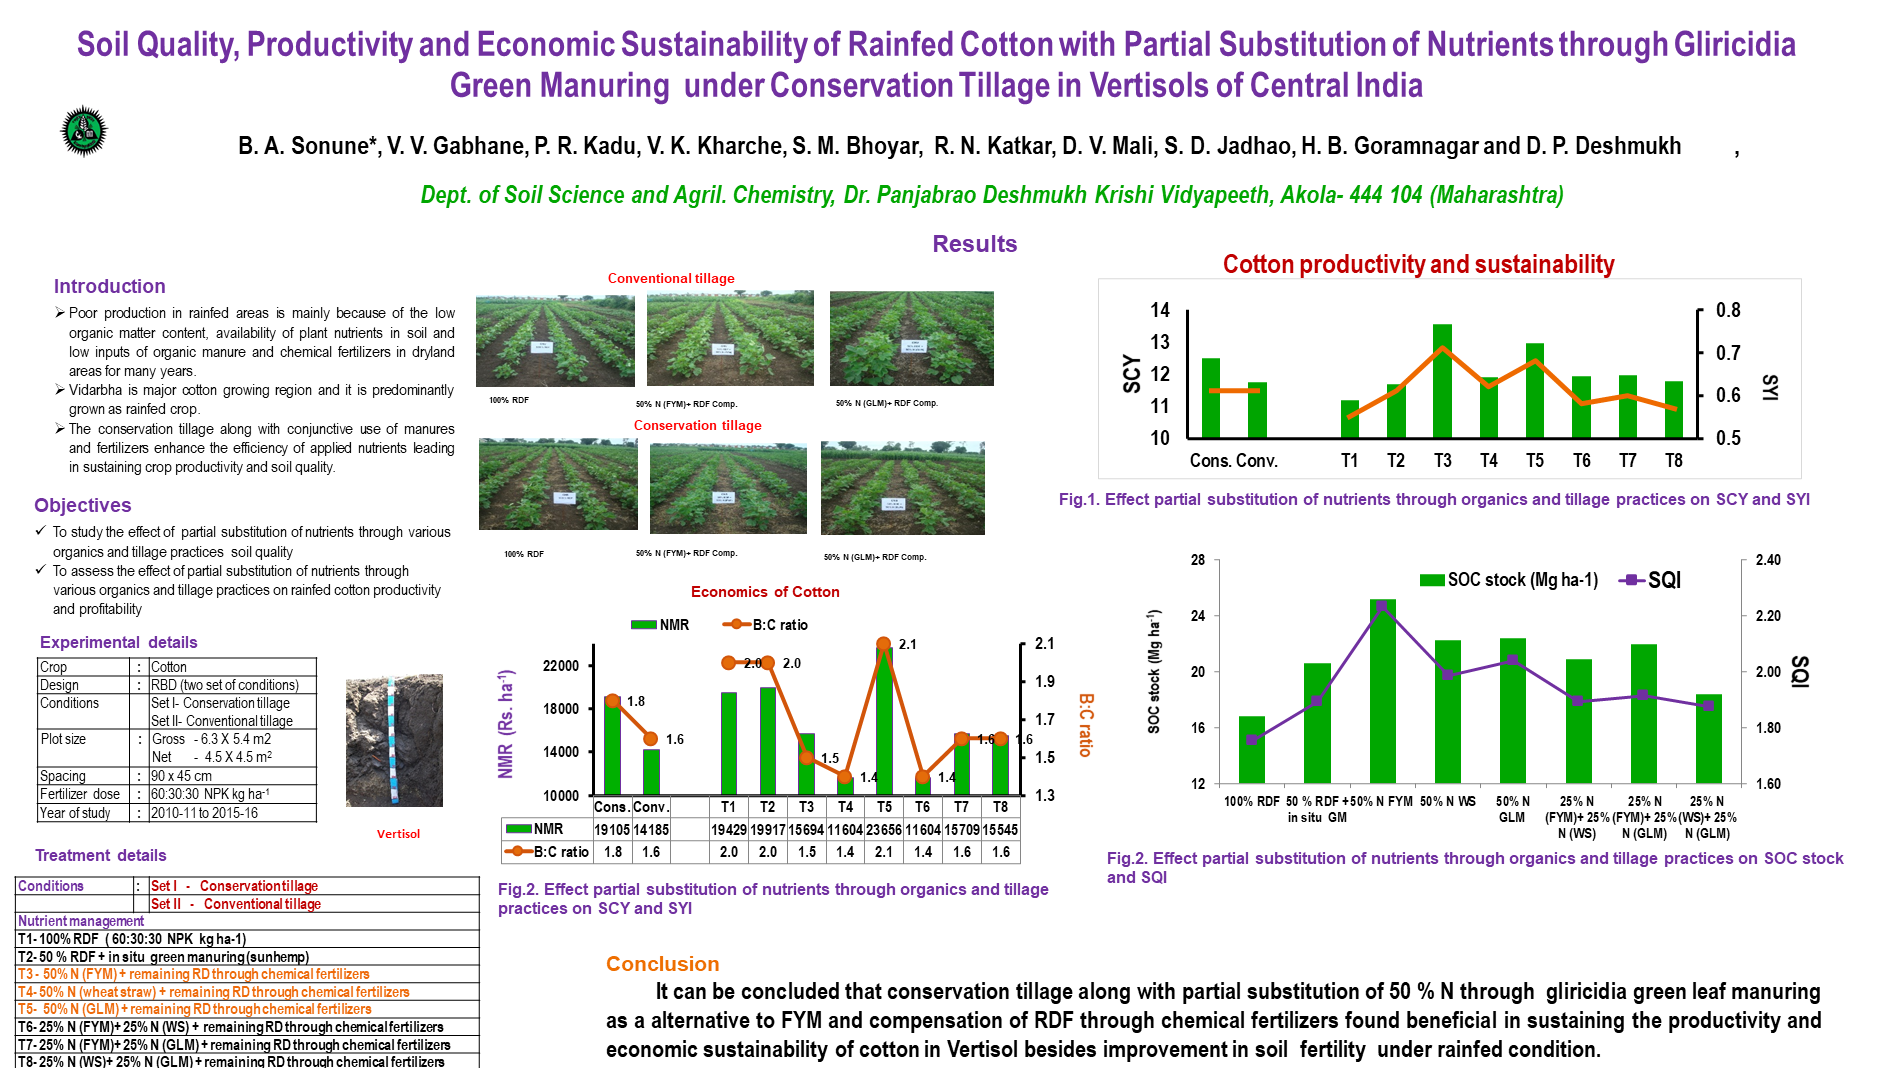 Soil Quality, Productivity and Economic Sustainability of Rainfed Cotton with Partial Substitution of Nutrients through Gliricidia Green Manuring under Conservation Tillage in Vertisols of Central India